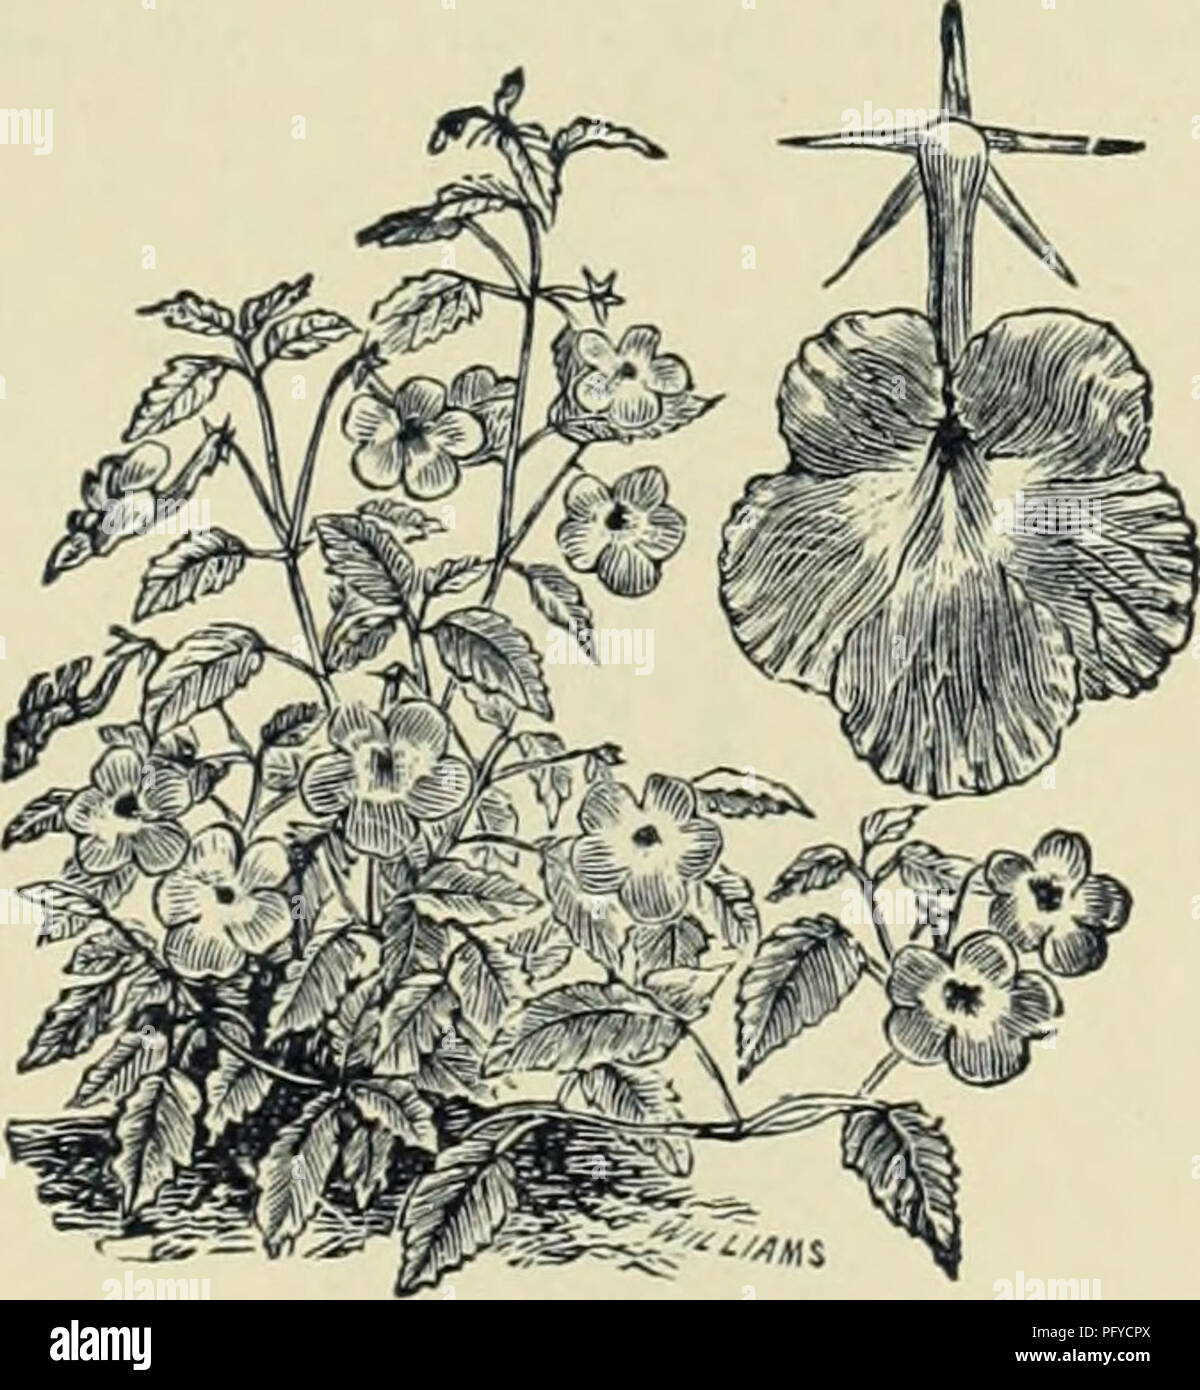 . Currie Bros.' horticultural guide : spring 1888. Nursery stock Wisconsin Catalogs; Flowers Seeds Catalogs; Bulbs (Plants) Seeds Catalogs; Vegetables Seeds Catalogs; Plants, Ornamental Catalogs; Gardening Equipment and supplies Catalogs. ACROCLINUM. A beautiful everlasting flower, resembling the Rho- danthe, but larger. Cut the flowers for winter bouquets before they are fully open. Half-hardy annuals. Album—Pure white, 1 foot 5 Roseum—Bright rose, 1 foot 5 Roseum fl. pi.—Double rose, 1 foot 10 Album fl. pi.—Double white, 1 foot 10 3 ABRONIA. Pretty little plants, resembling the Verbena in th Stock Photo